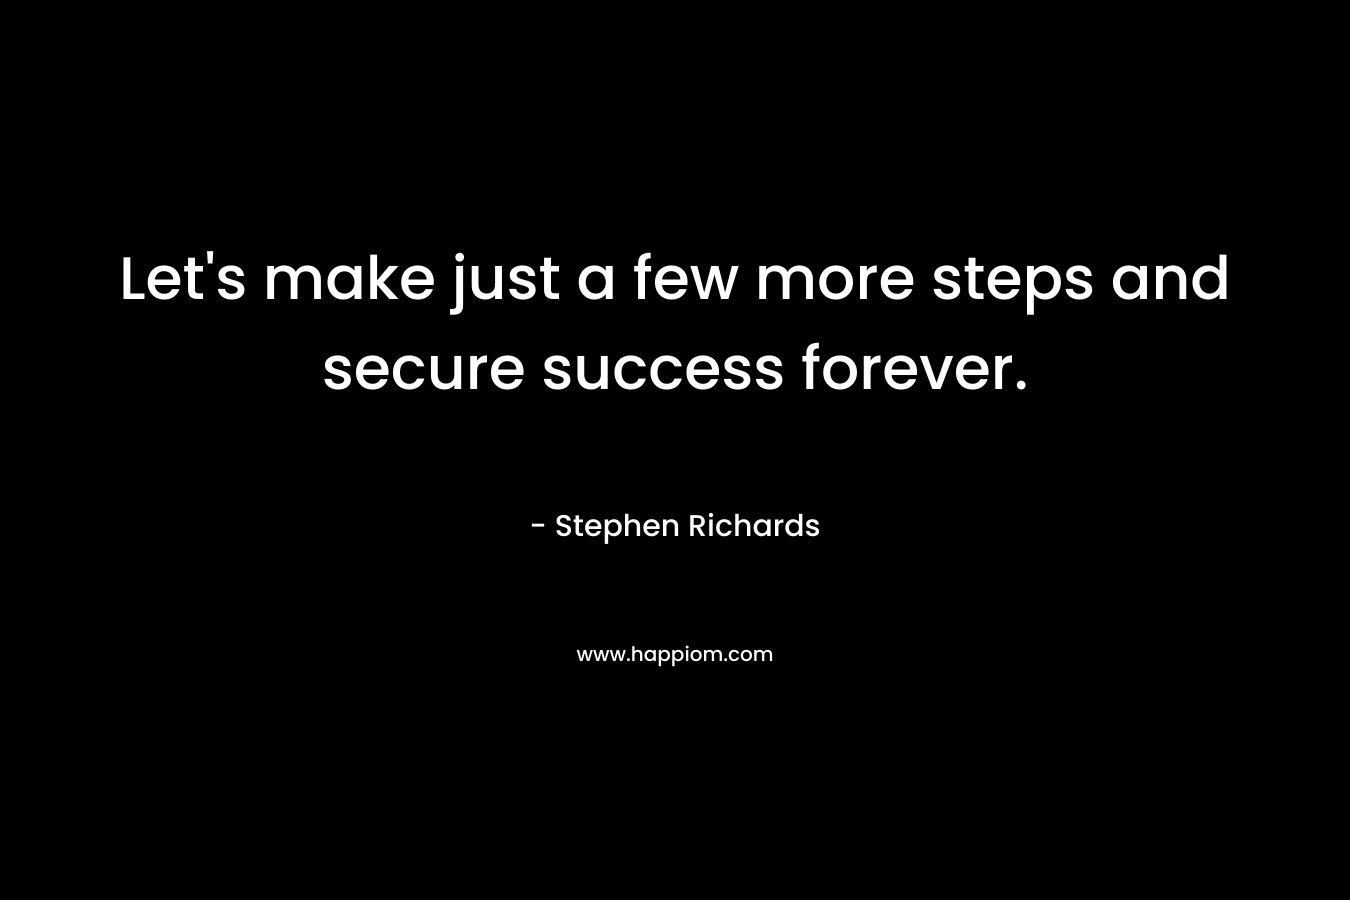 Let’s make just a few more steps and secure success forever. – Stephen Richards